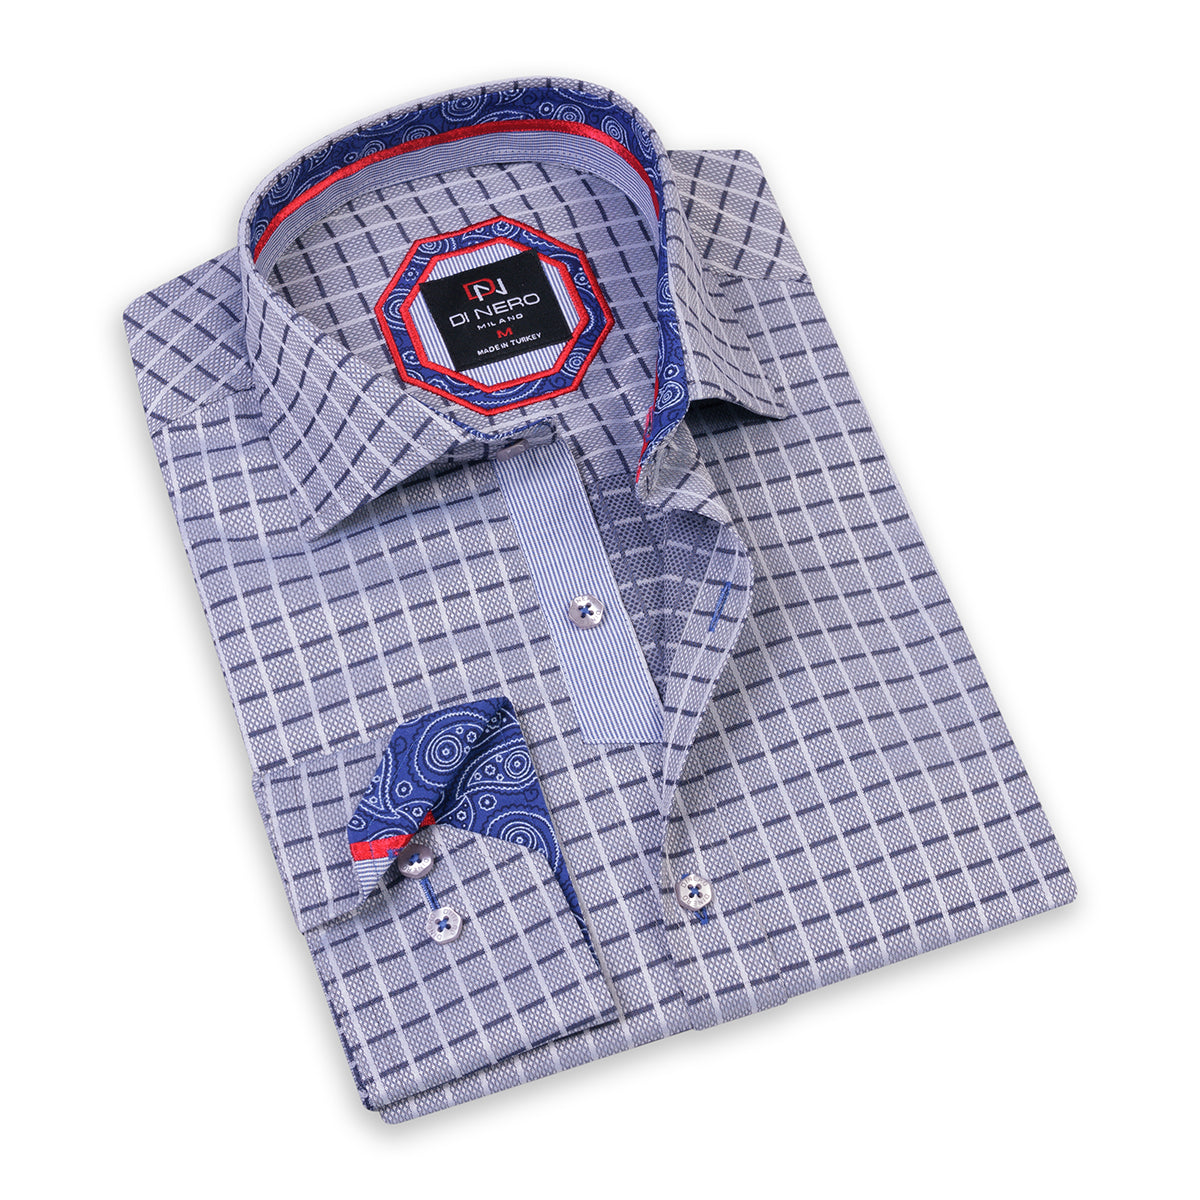 This Di Nero silver grey dress shirt is a versatile men's top that can be worn in any setting. With a soft, checkered cotton fabric, it can be worn with a tie and sport jacket, or black DFR89 denim jeans and left open-collared.